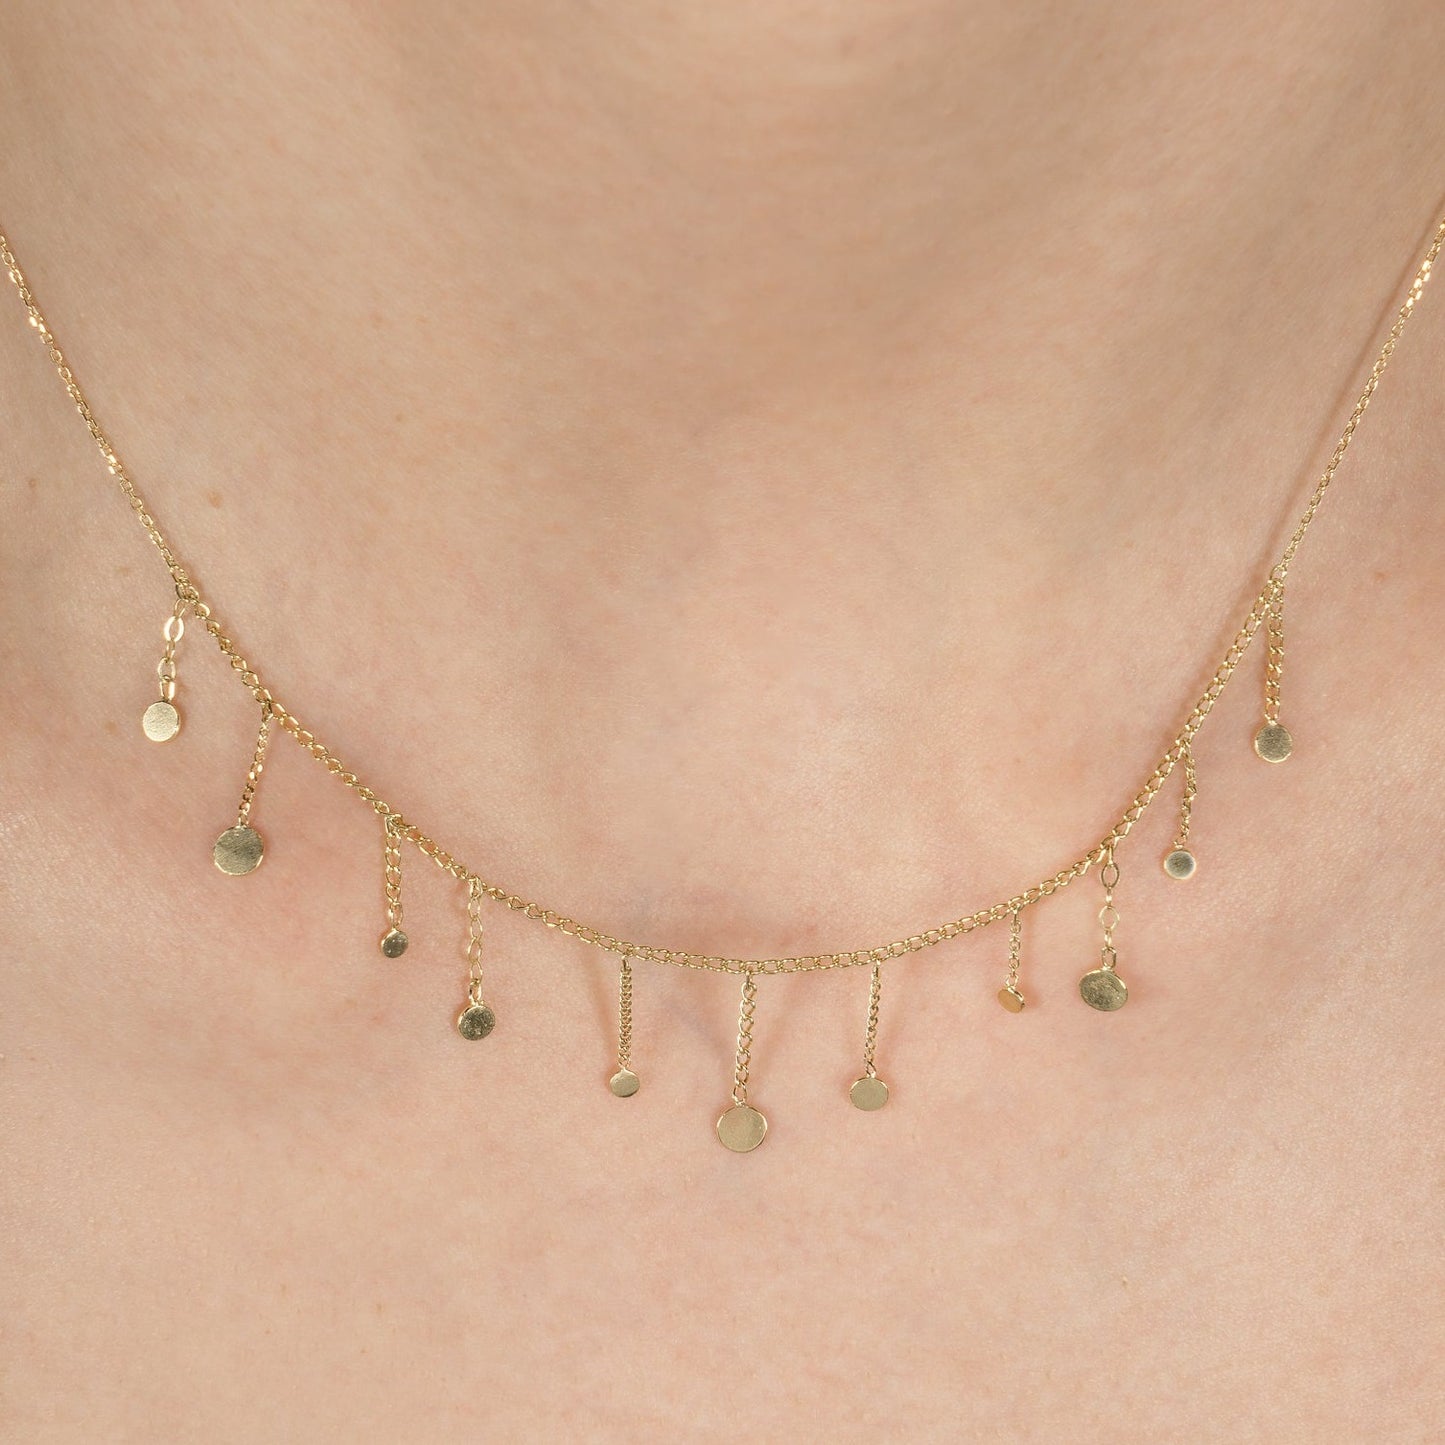 Sweet Pea 18ct gold Ancient World chain necklace with chain and disc drops on model